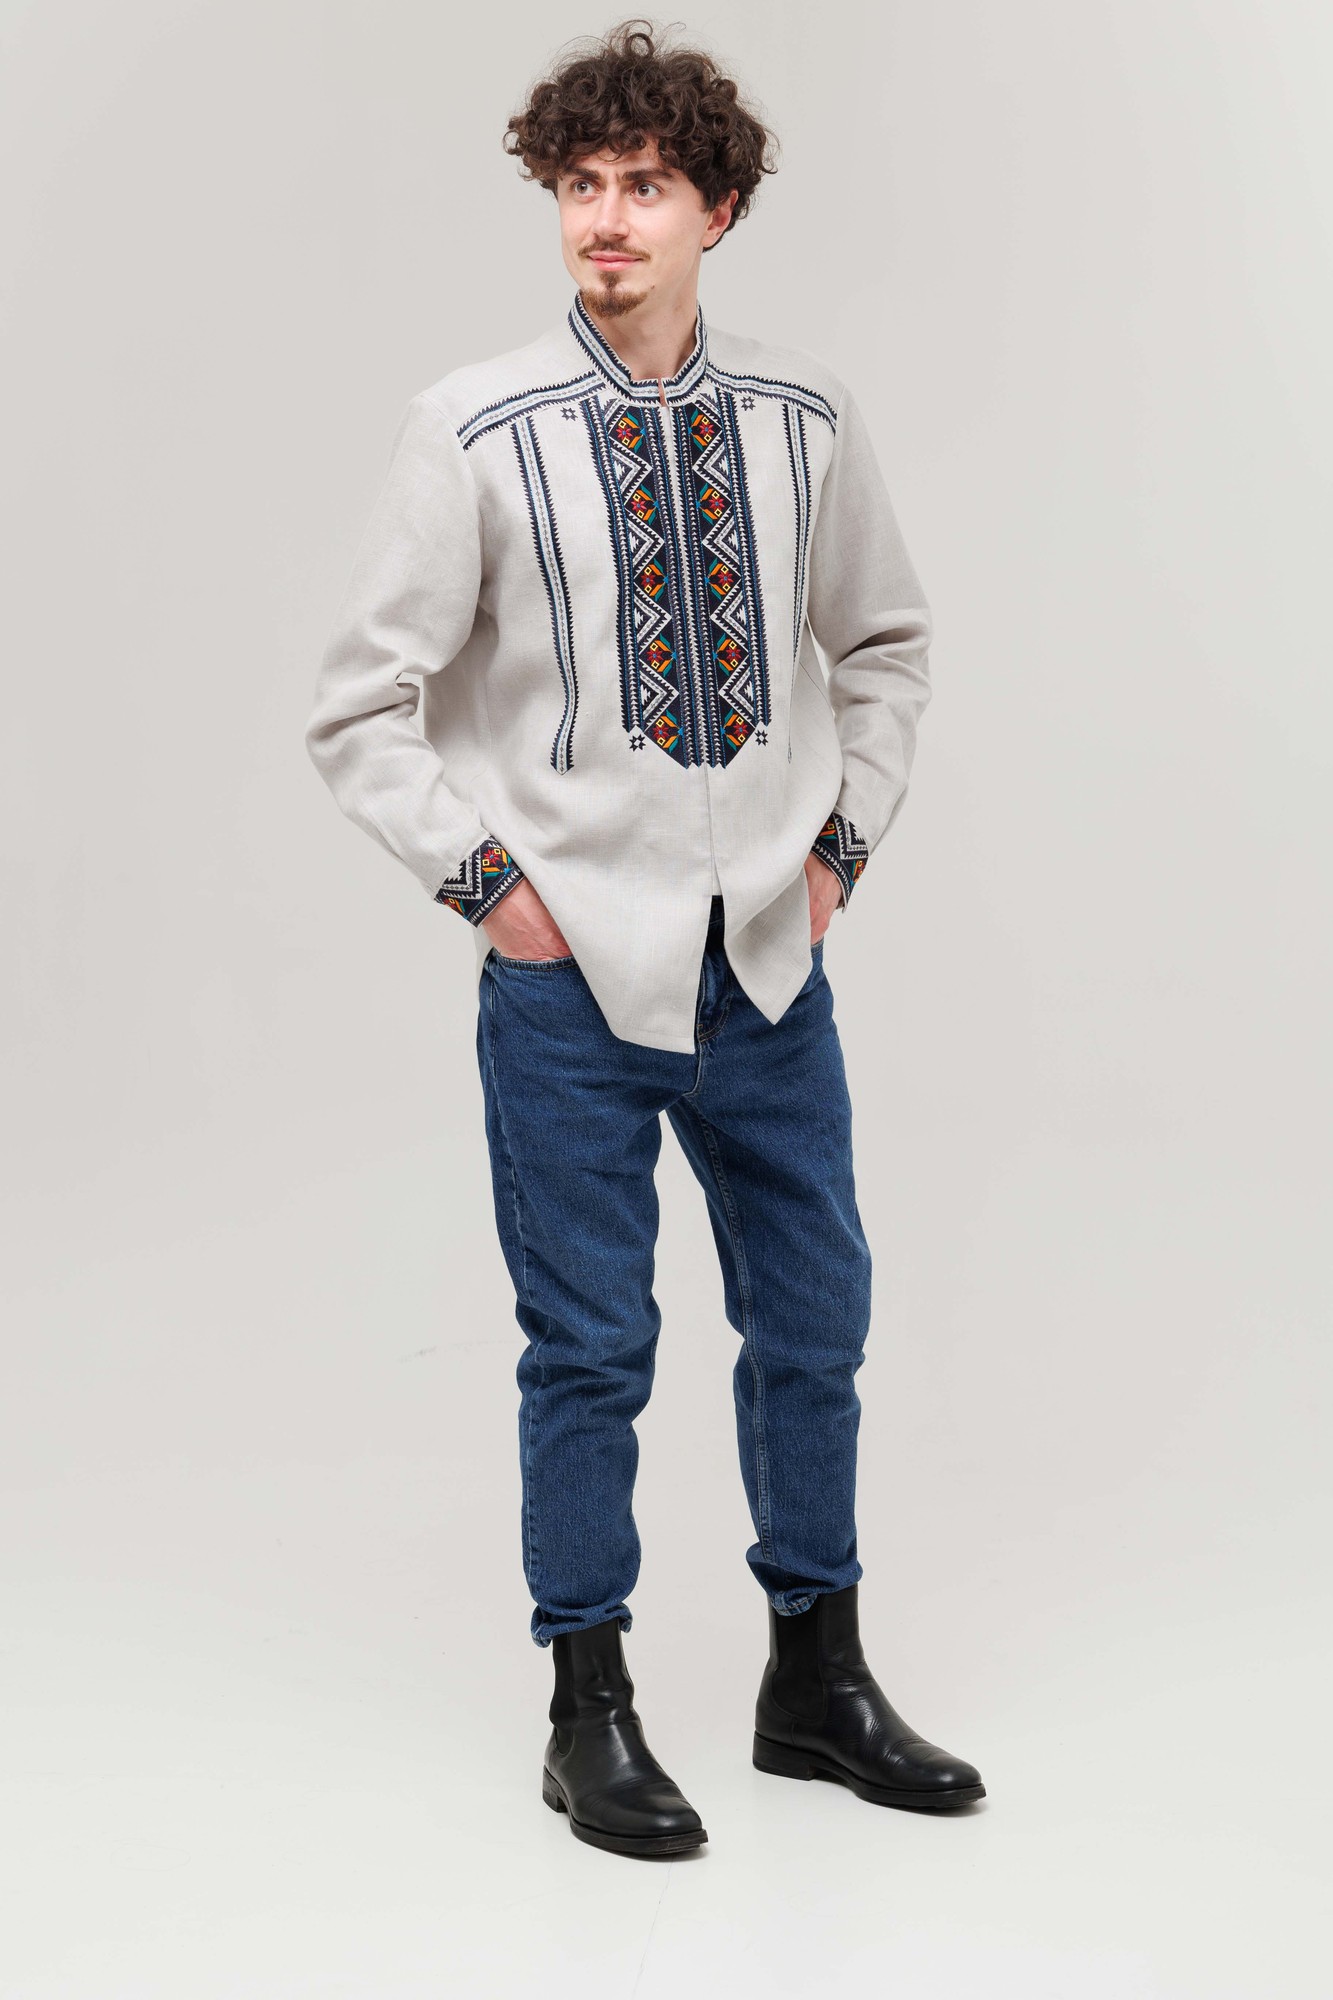 Men's embroidered shirt "Dolyna"